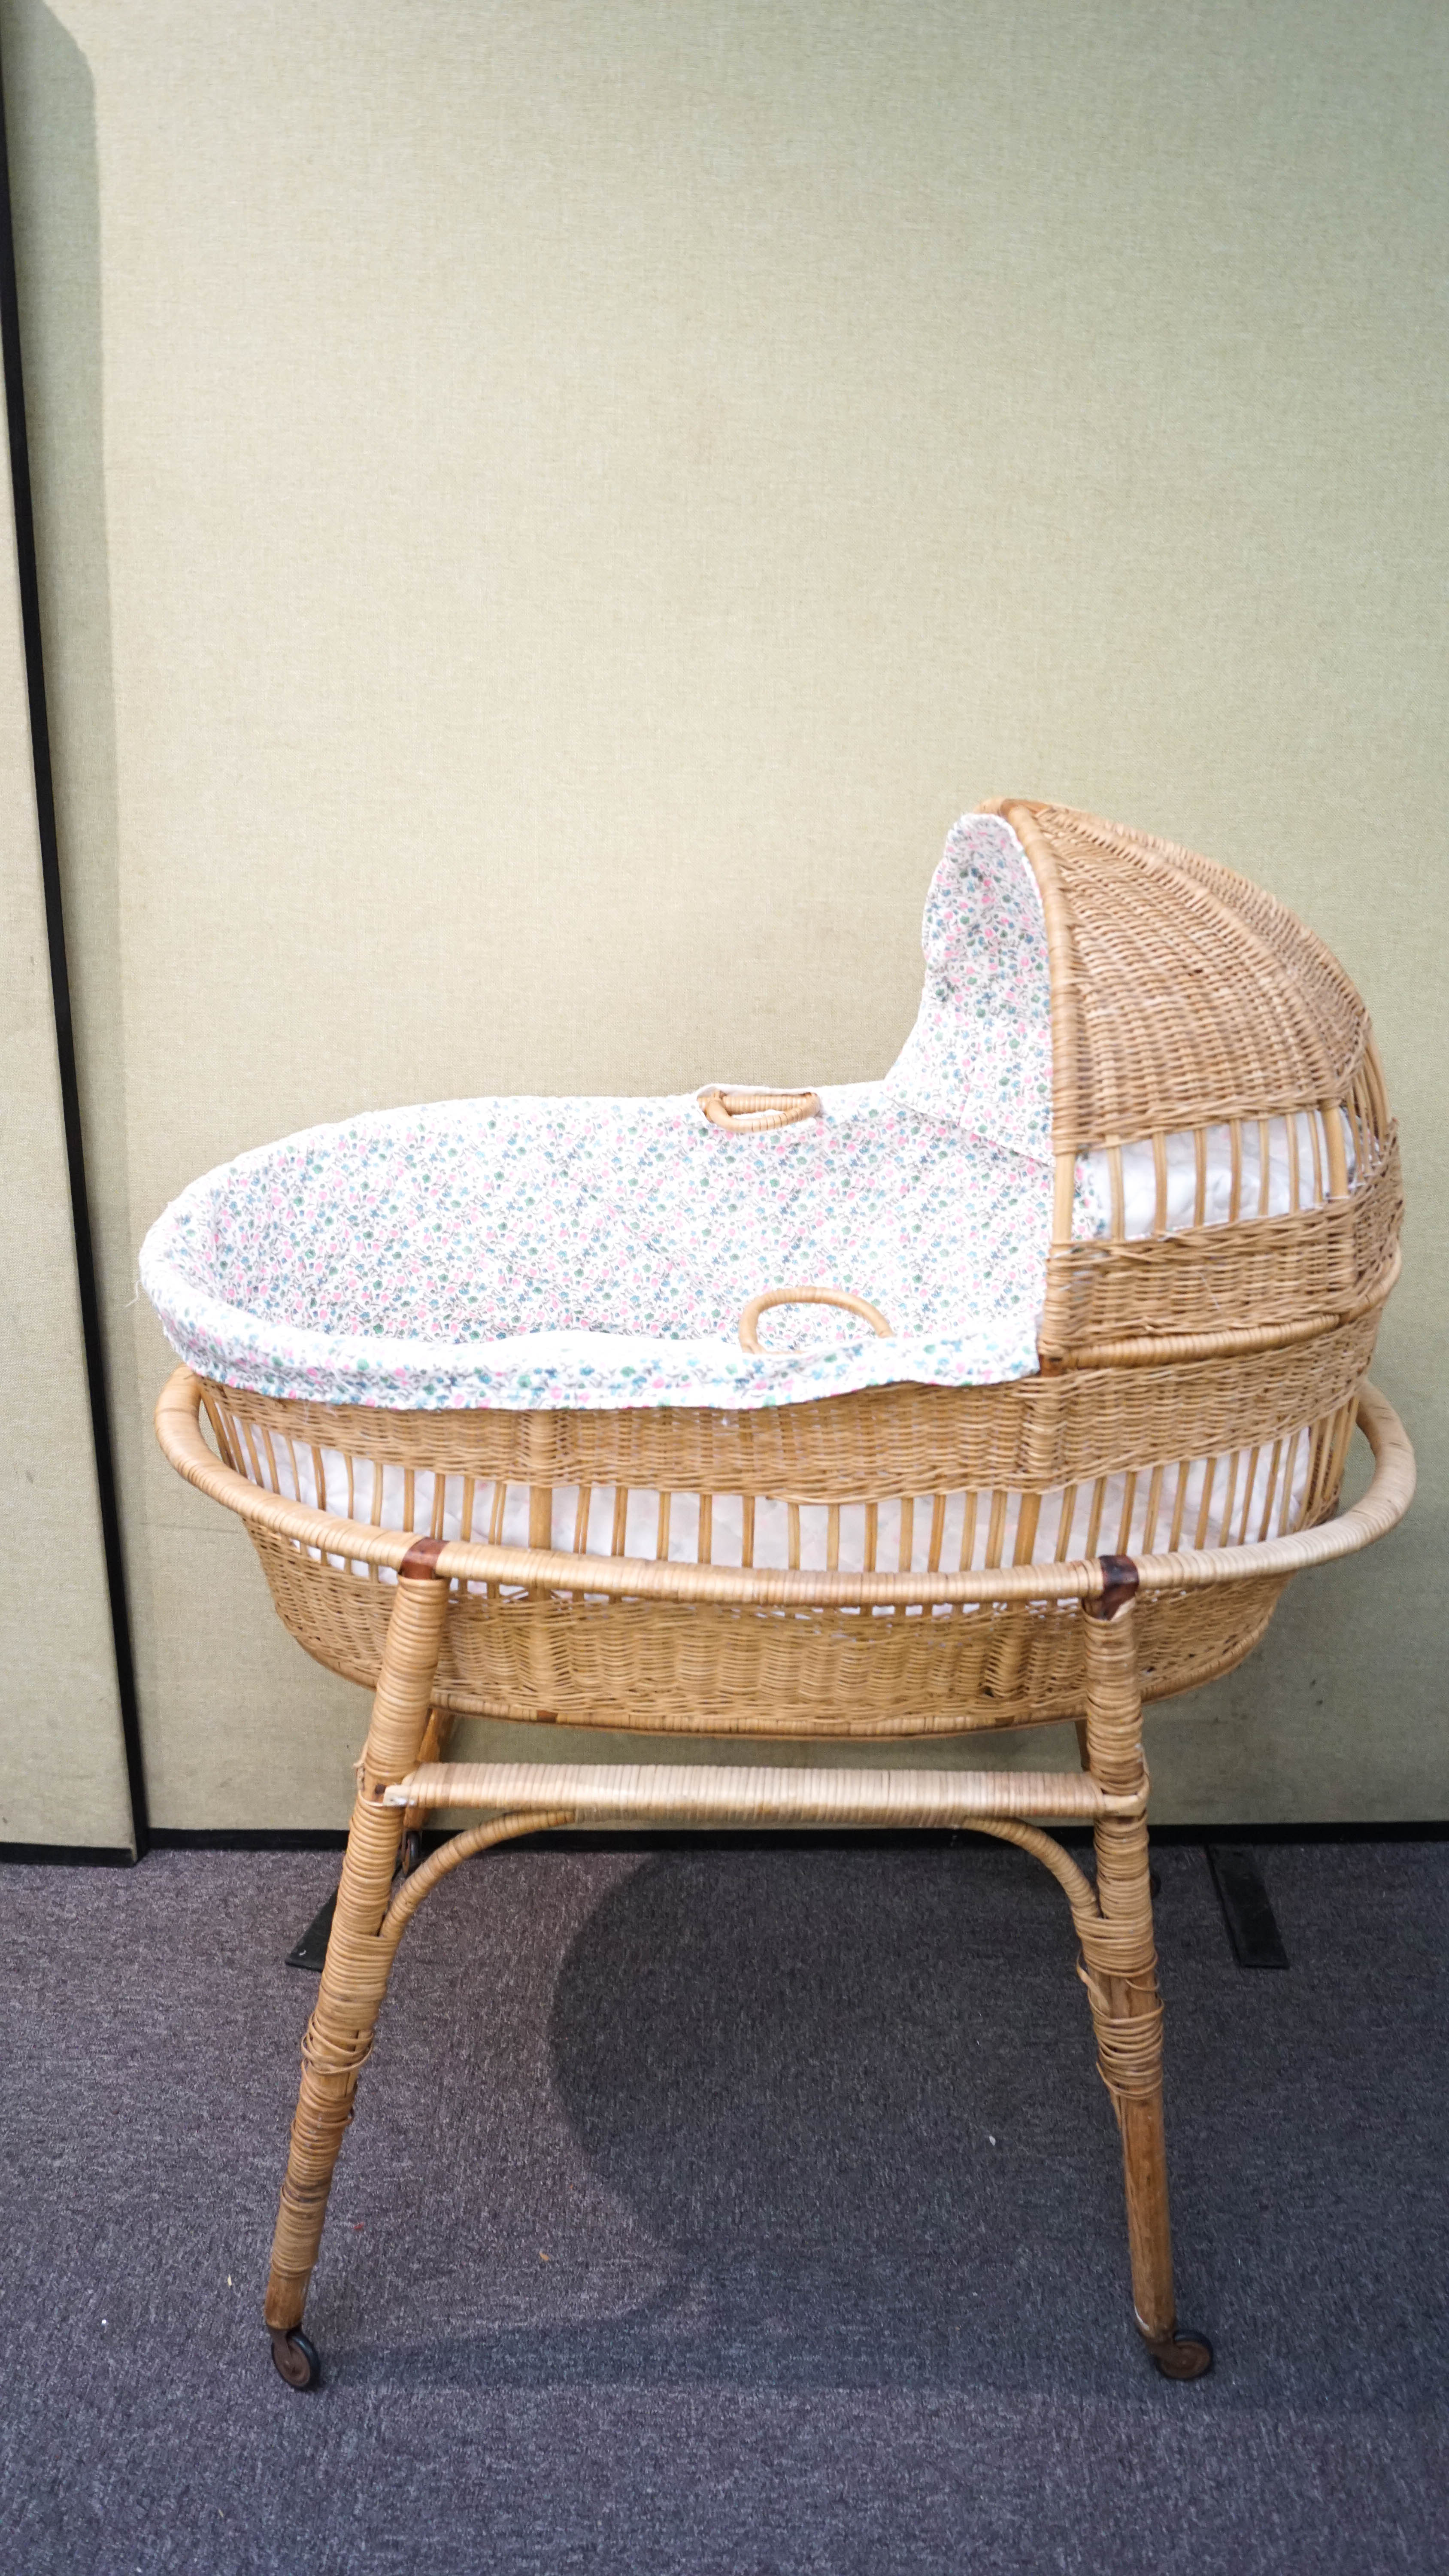 A 1960's retro vintage wicker weaved childs cradle on stand and castors.